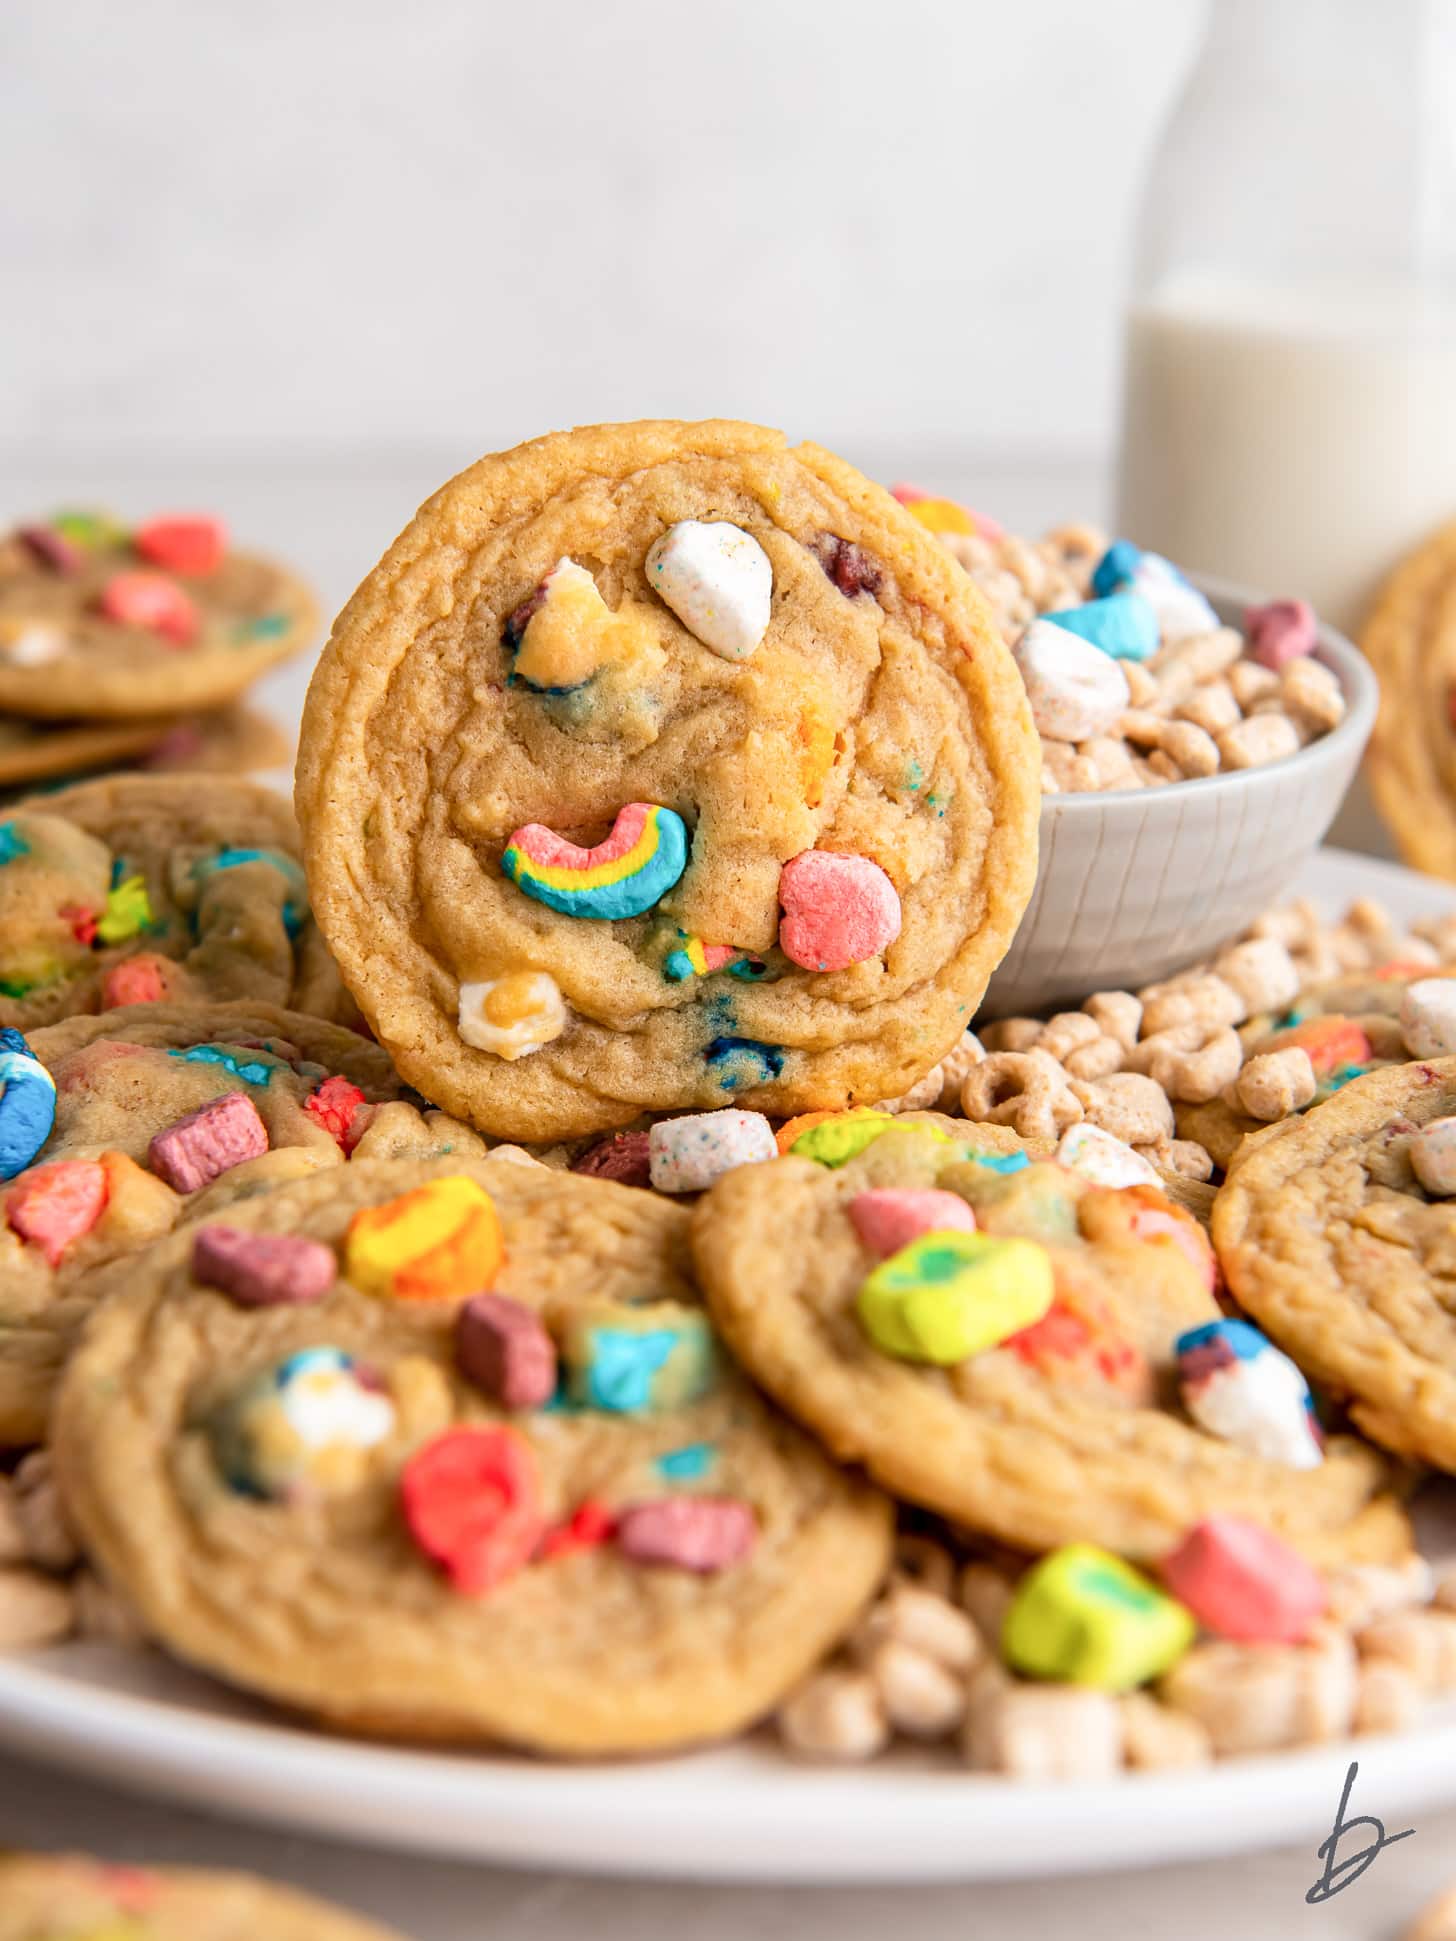 lucky charms cookie propped up on plate with more cookies.